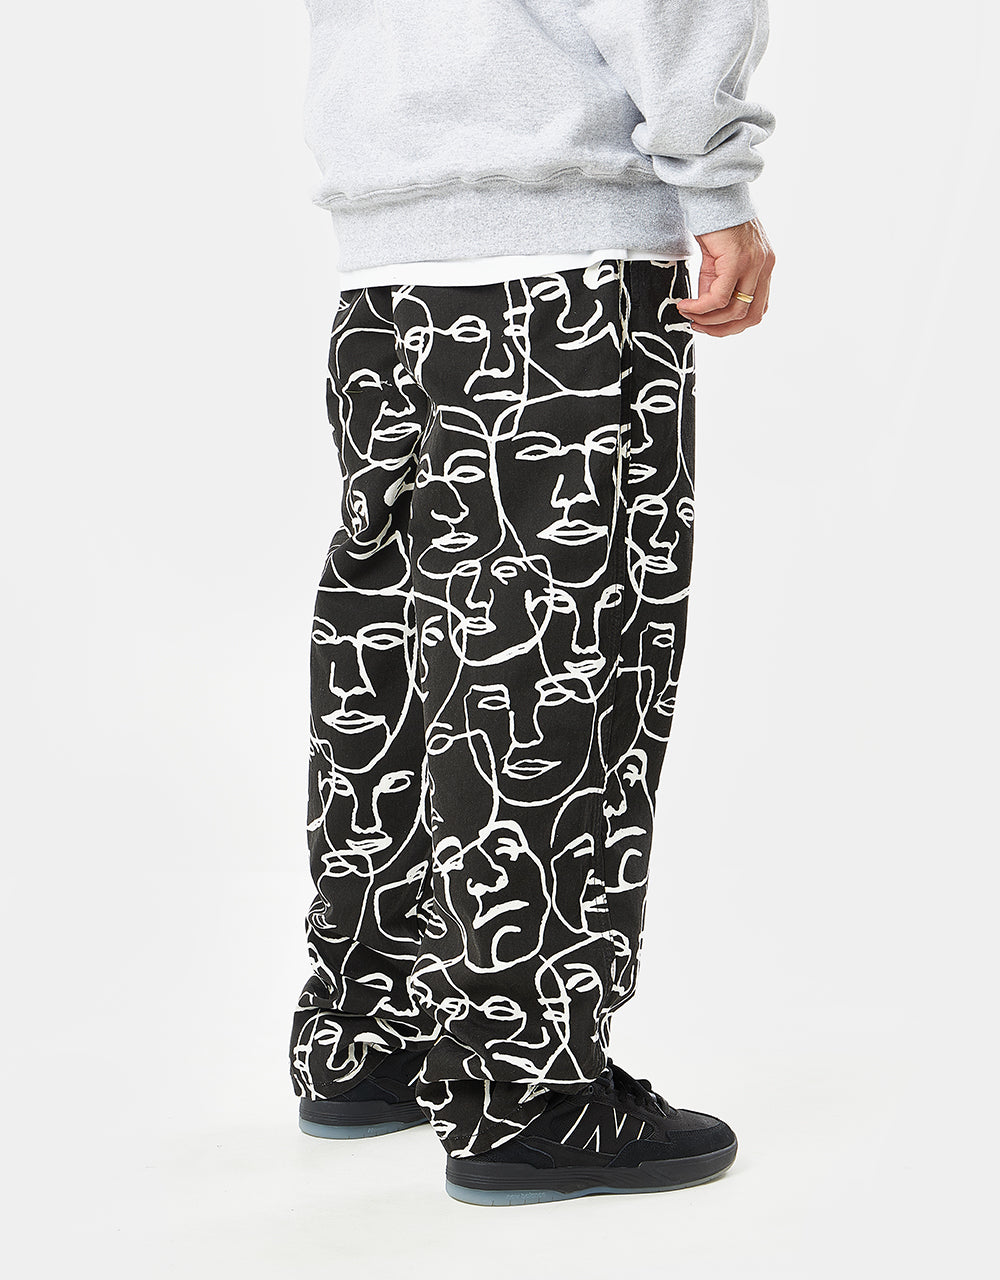 Route One Organic Baggy Pants - Faces Black/White